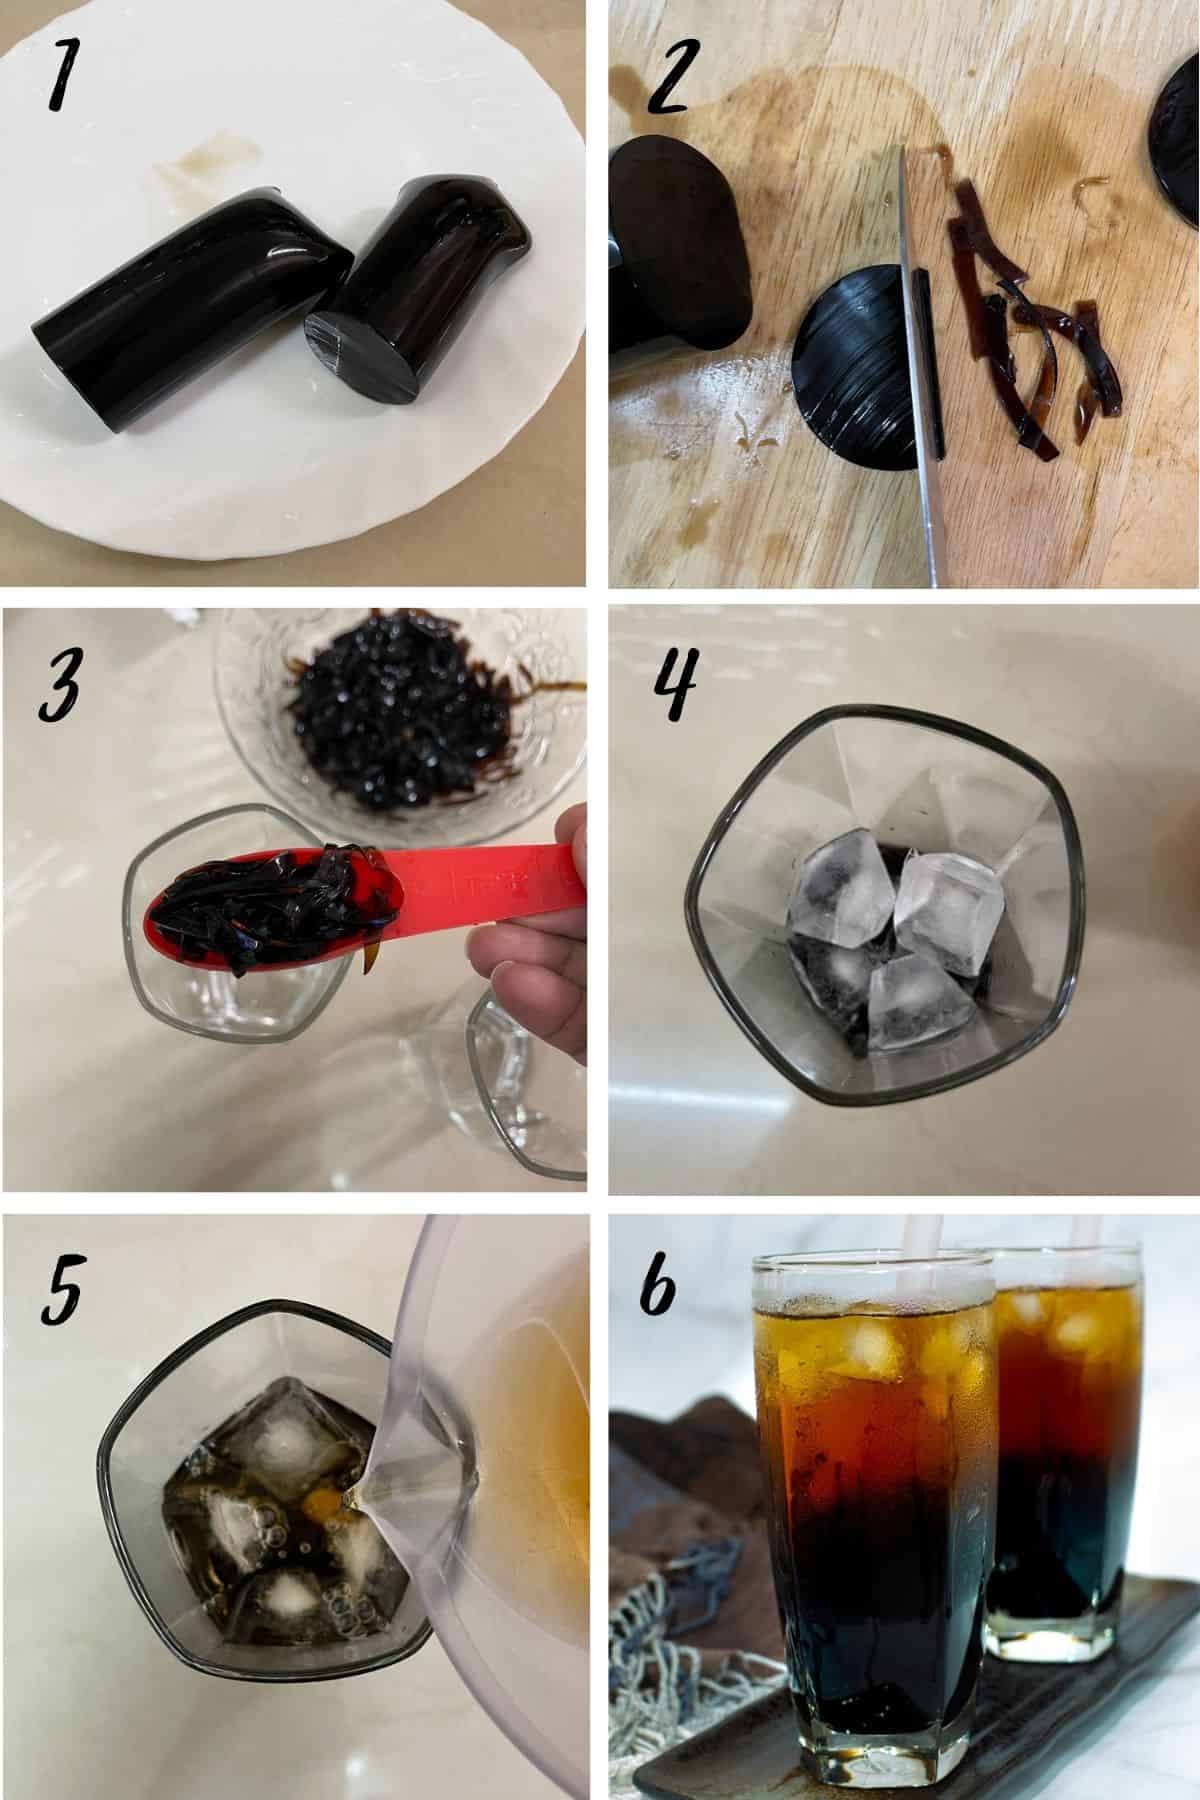 A poster of 6 images showing how to assemble the grass jelly tea.